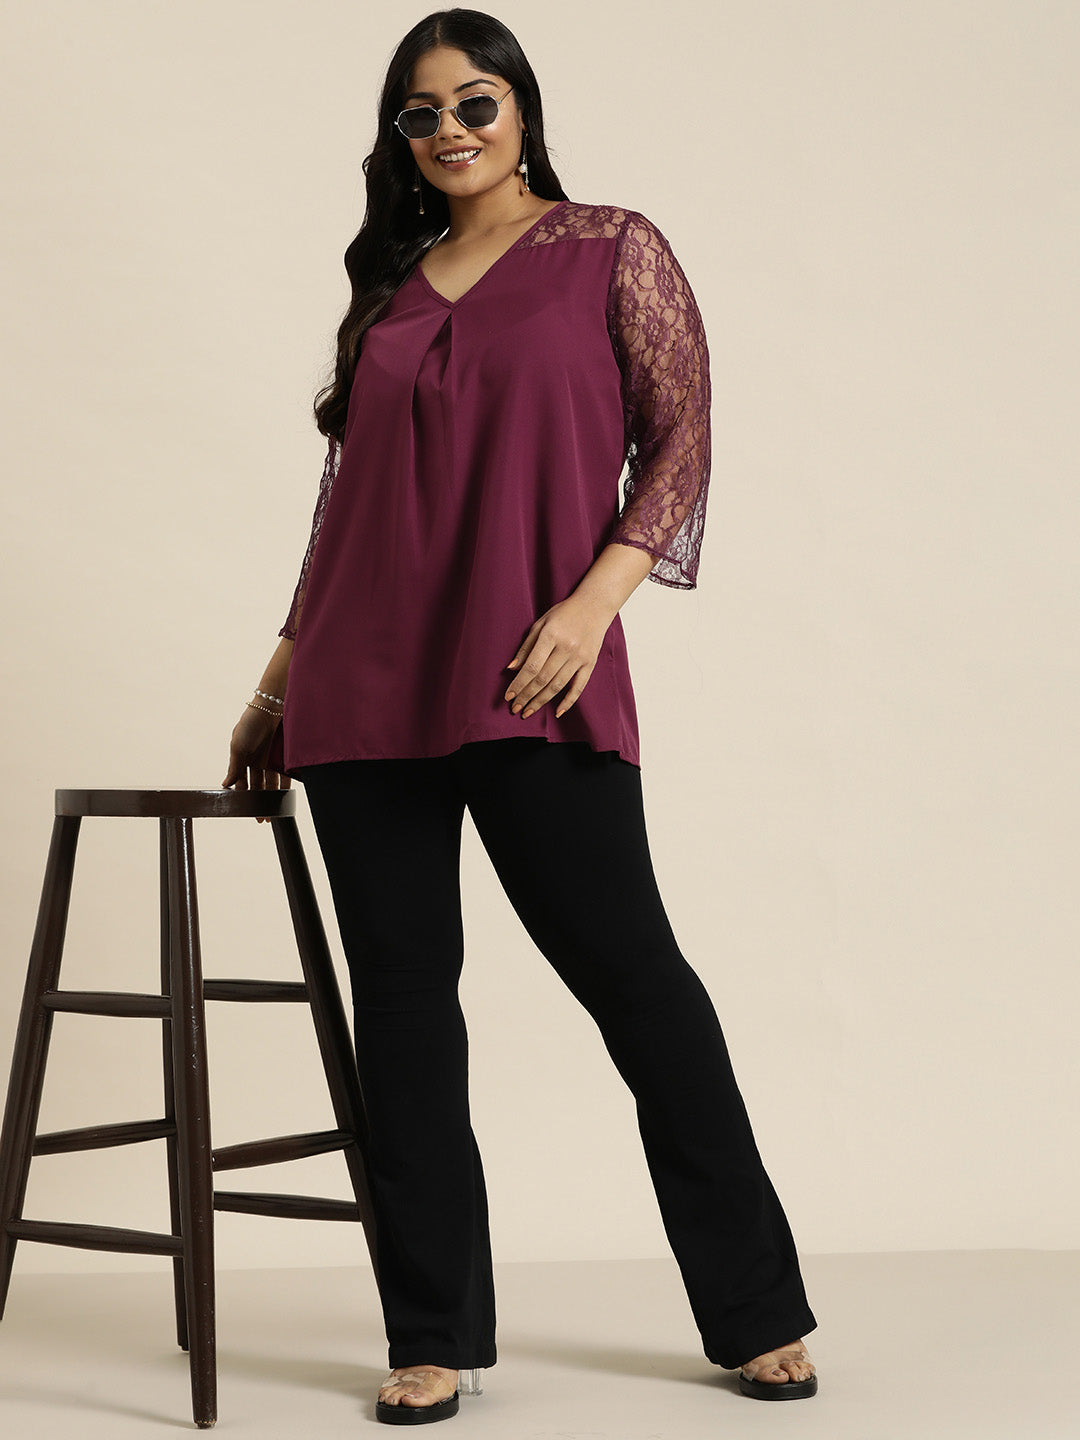 Flowy Wine floral net crepe tunic top